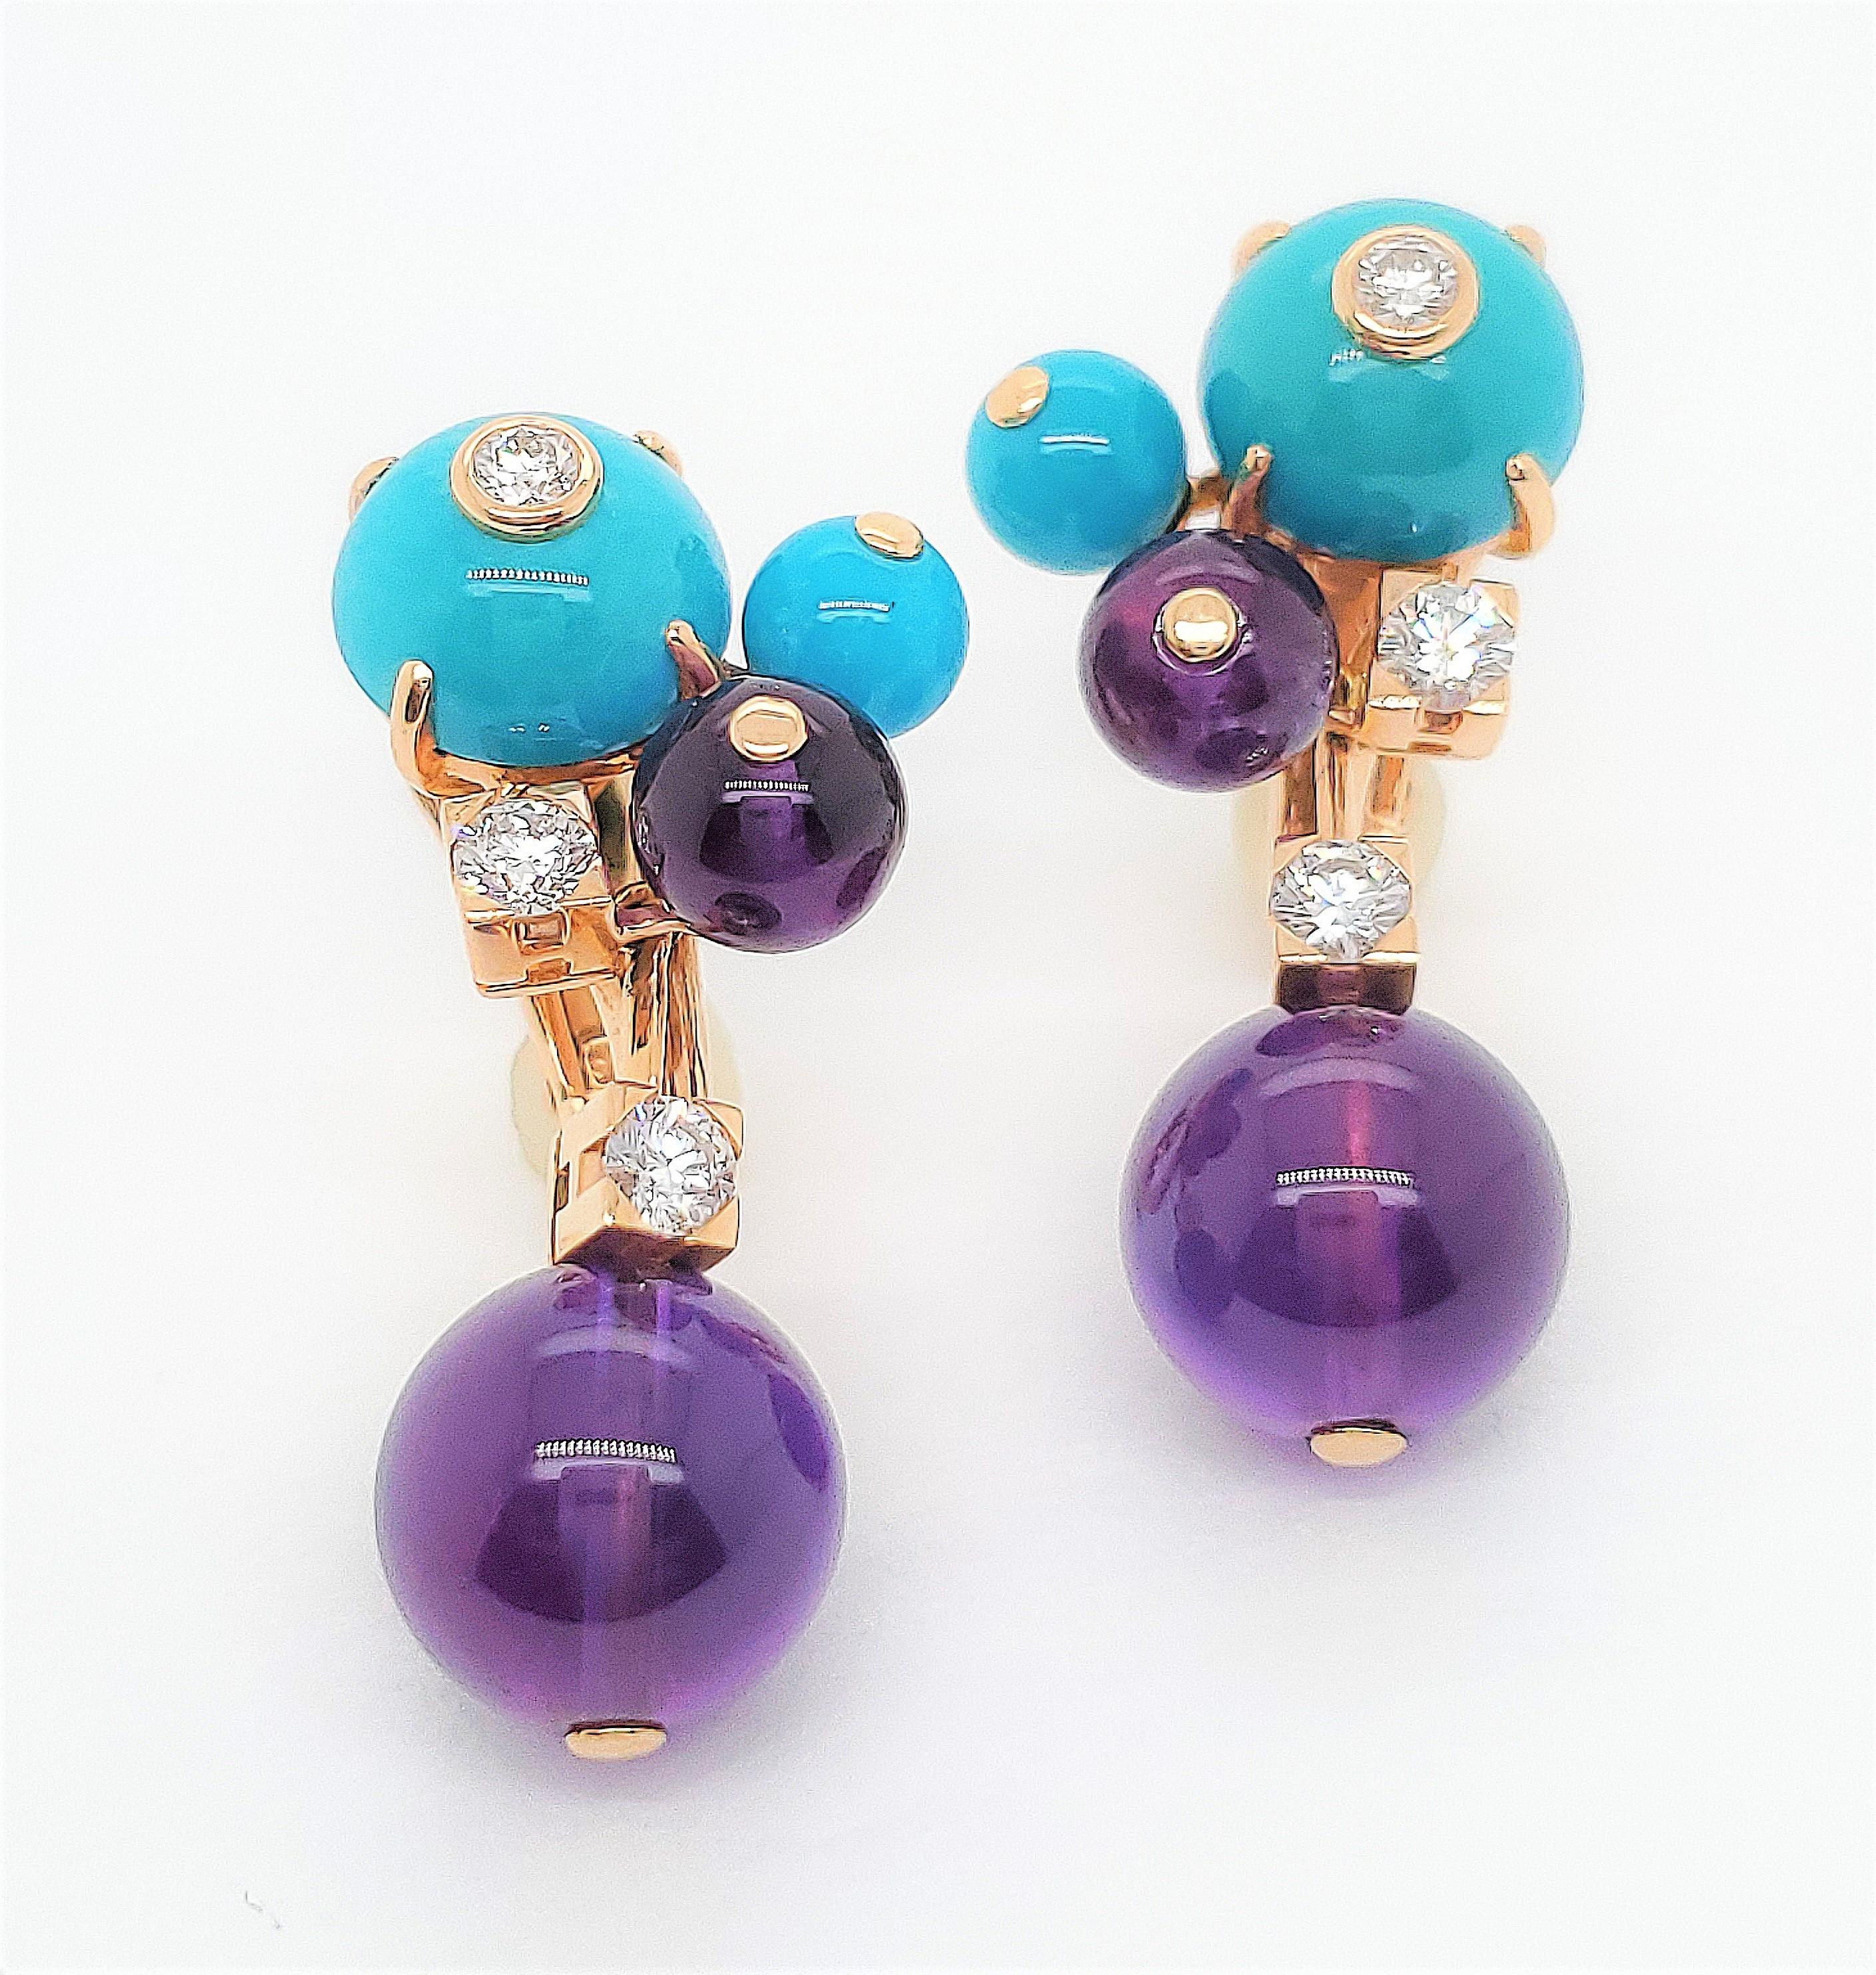 Authentic Cartier Les Delices de Goa collection earrings crafted in 18 karat yellow gold and bejeweled with turquoise and amethyst beads as well as 0.50 carats of round brilliant cut diamonds (F color, VS clarity). Signed Cartier, 750. The earrings